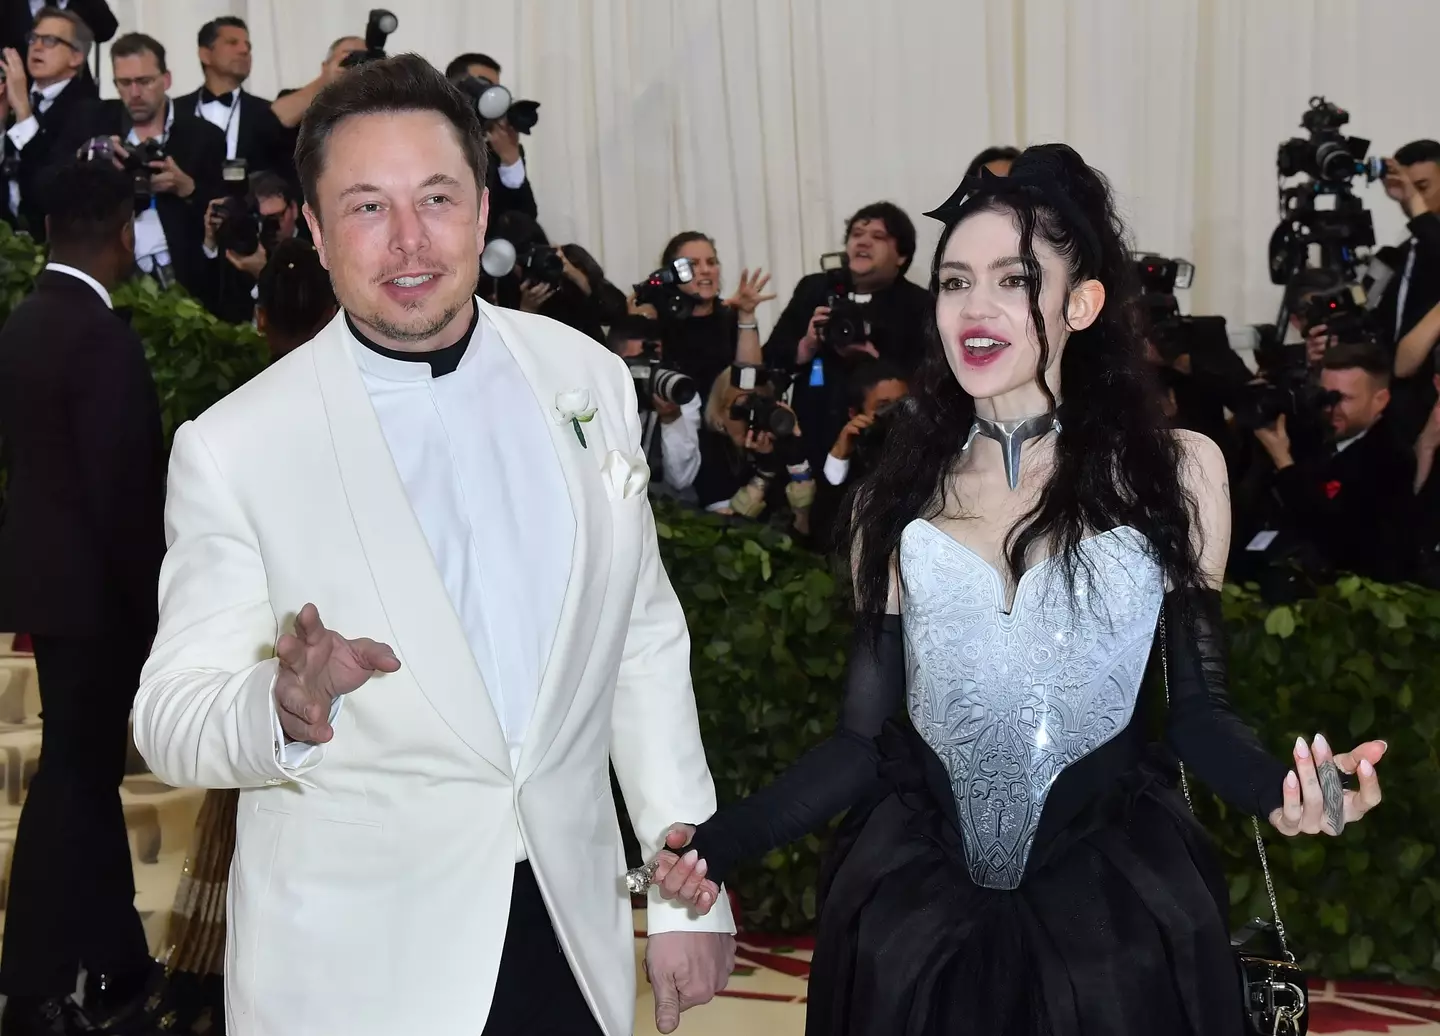 Elon Musk shares three children with singer Grimes (ANGELA WEISS/AFP via Getty Images)